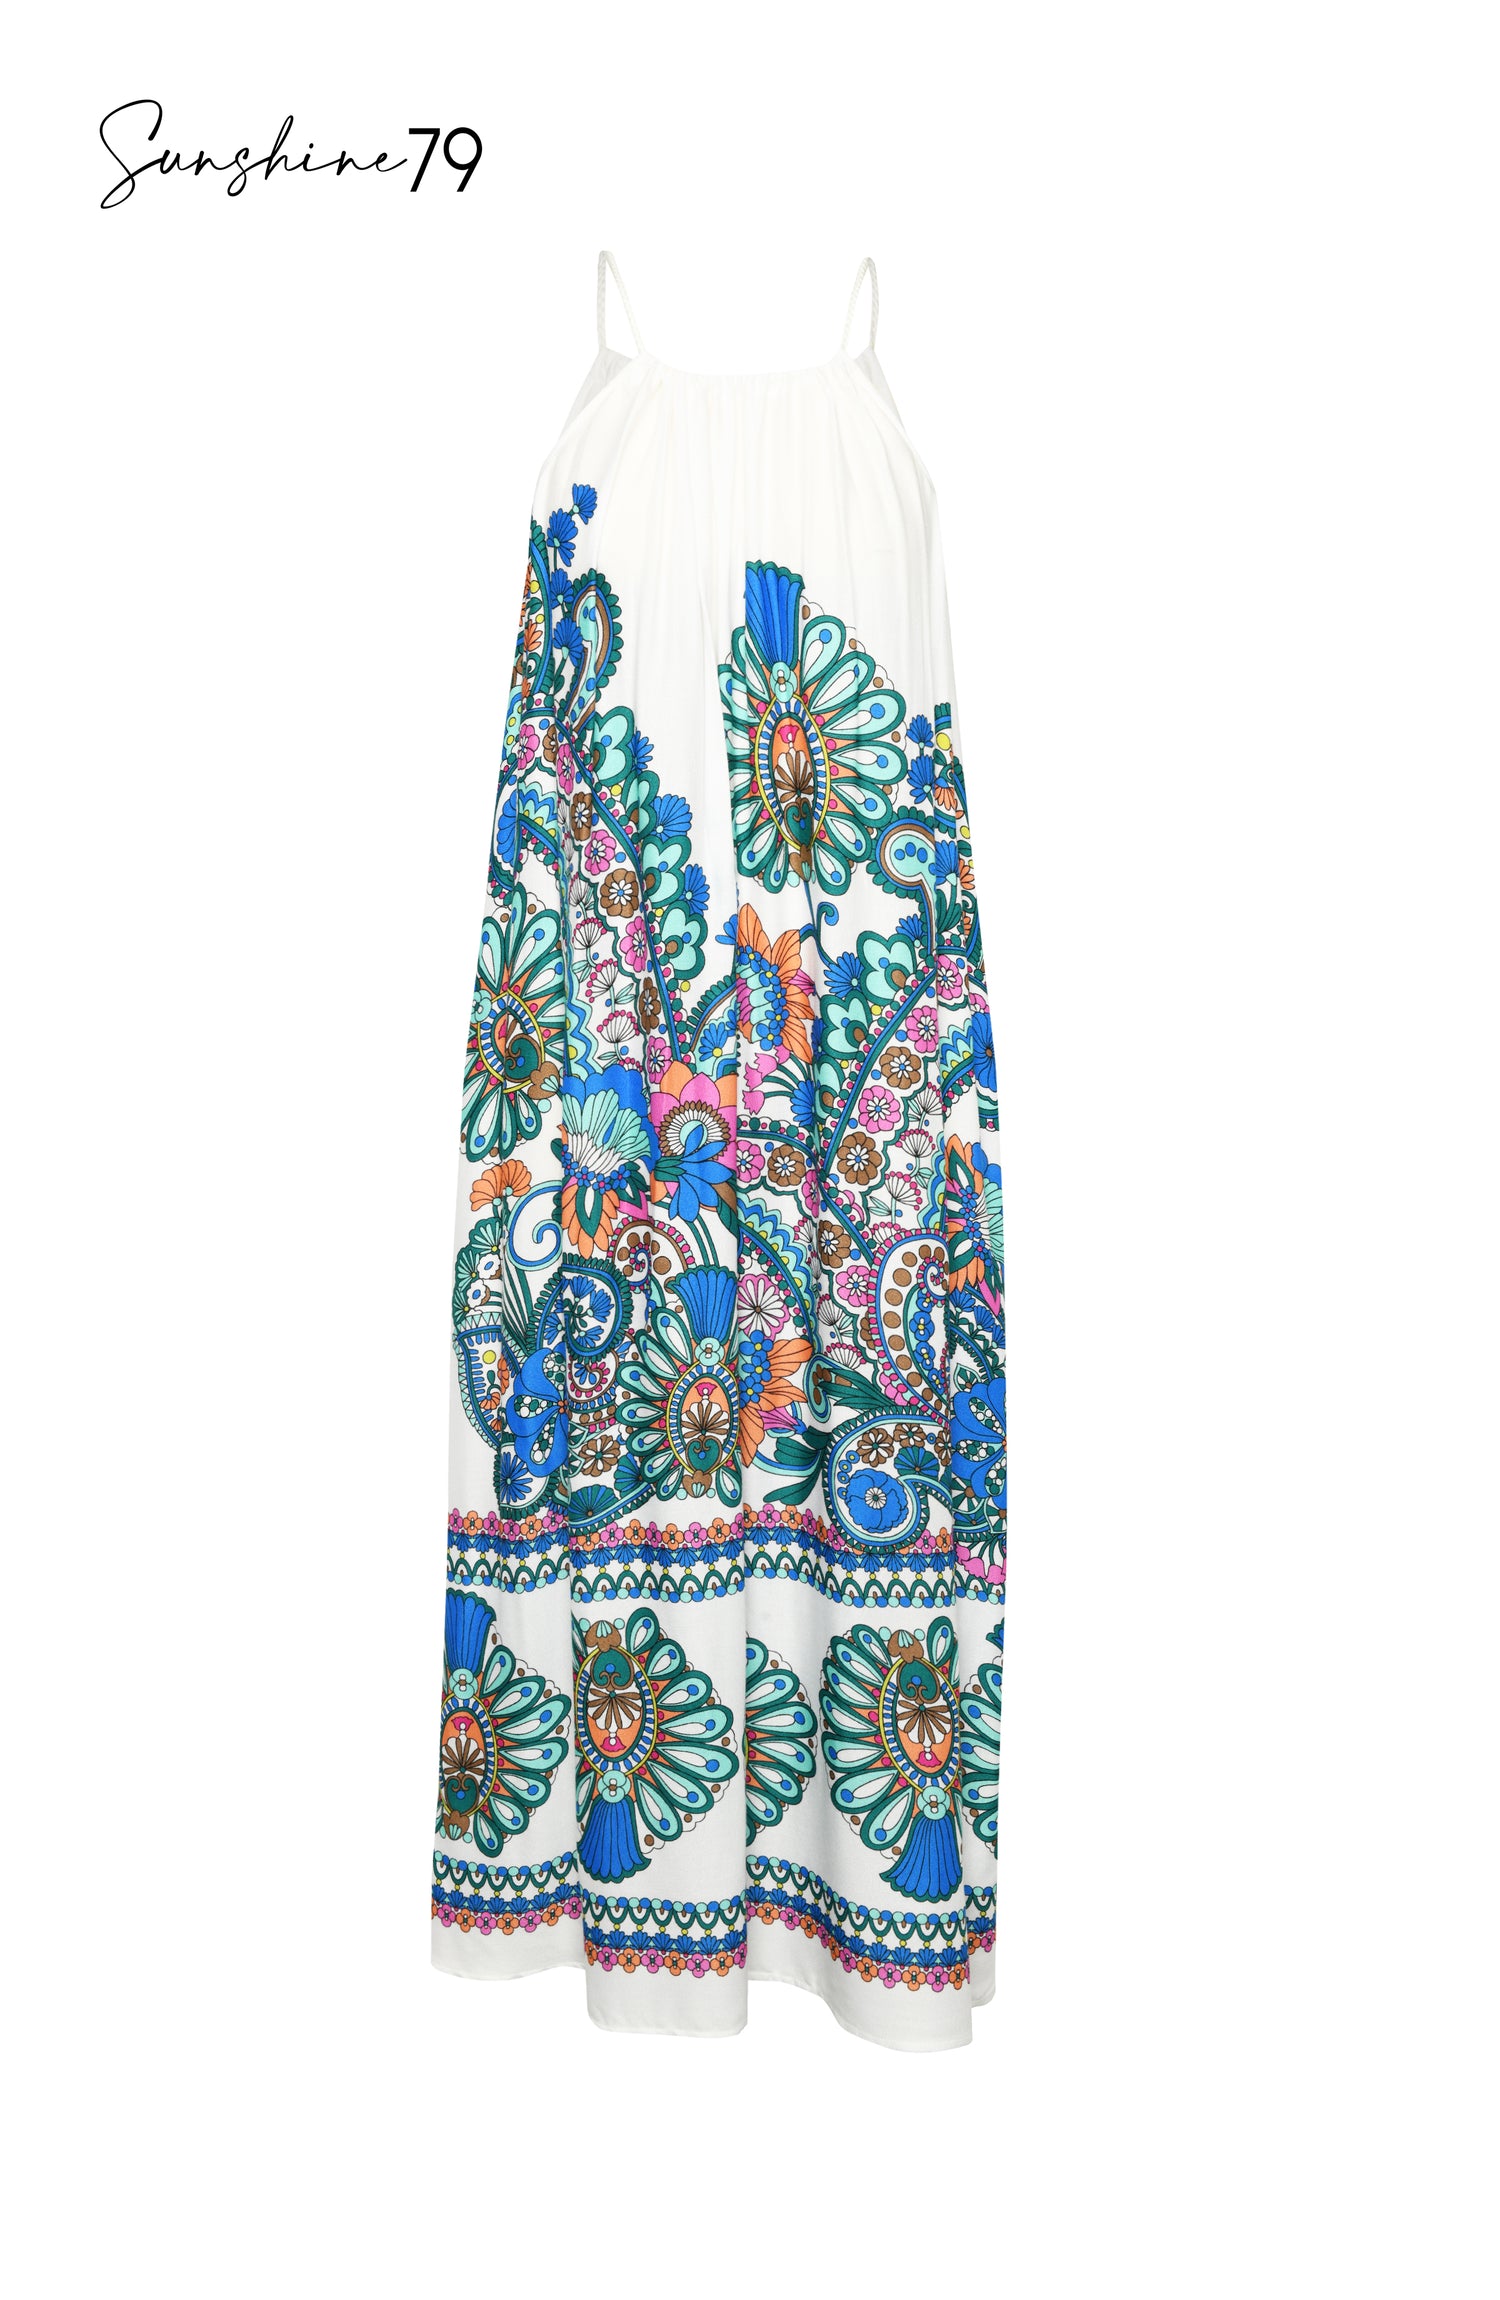 Feel Good Paisley Maxi Dress Swimsuit Cover Up